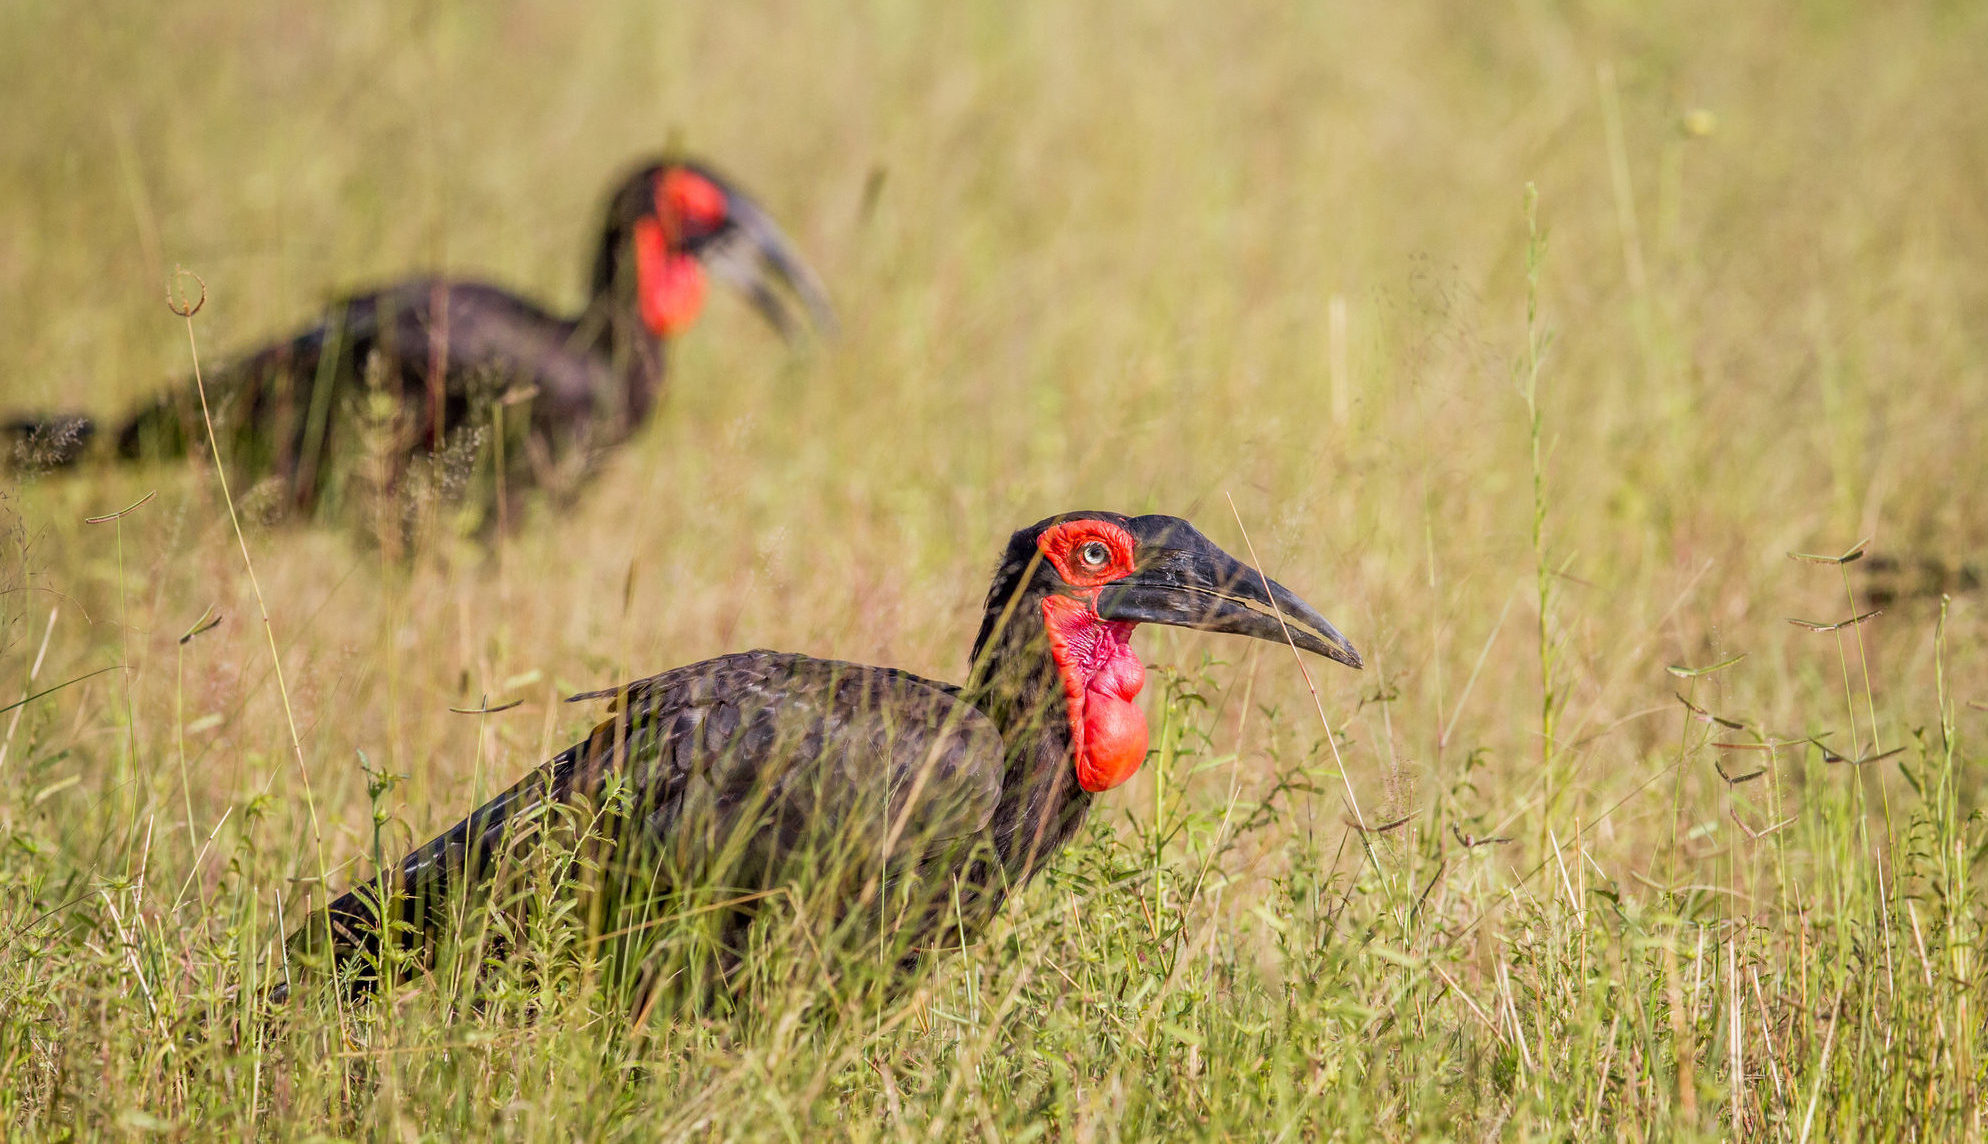 Witness extraordinary Zimbabwe wildlife like these southern ground hornbills in Hwange National Park when you take a tailor-made holiday with Alfred&.